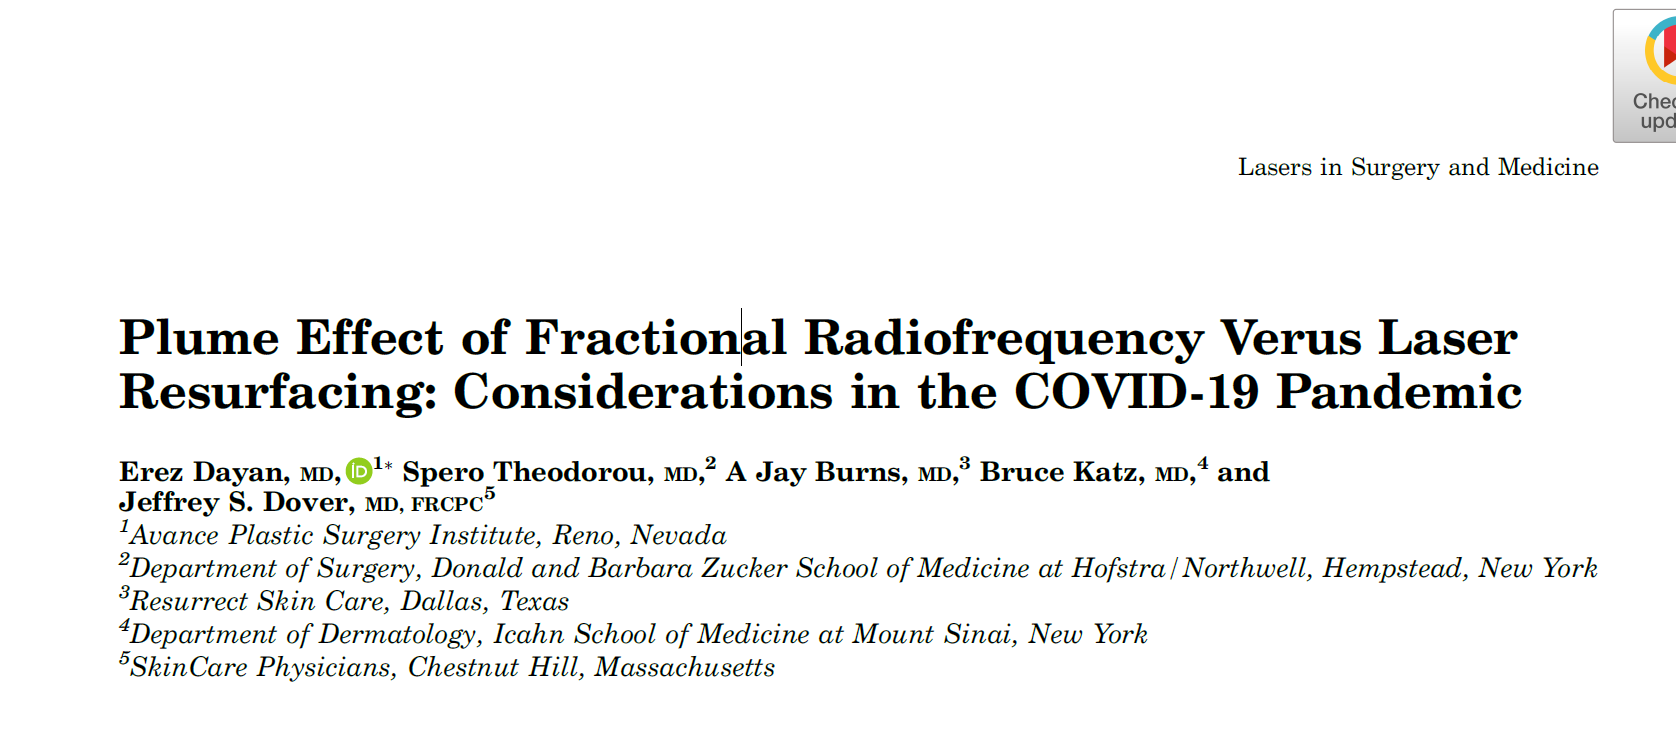 Plume Effect of Fractional Radiofrequency Verus Laser Resurfacing: Considerations in the COVID‐19 Pandemic